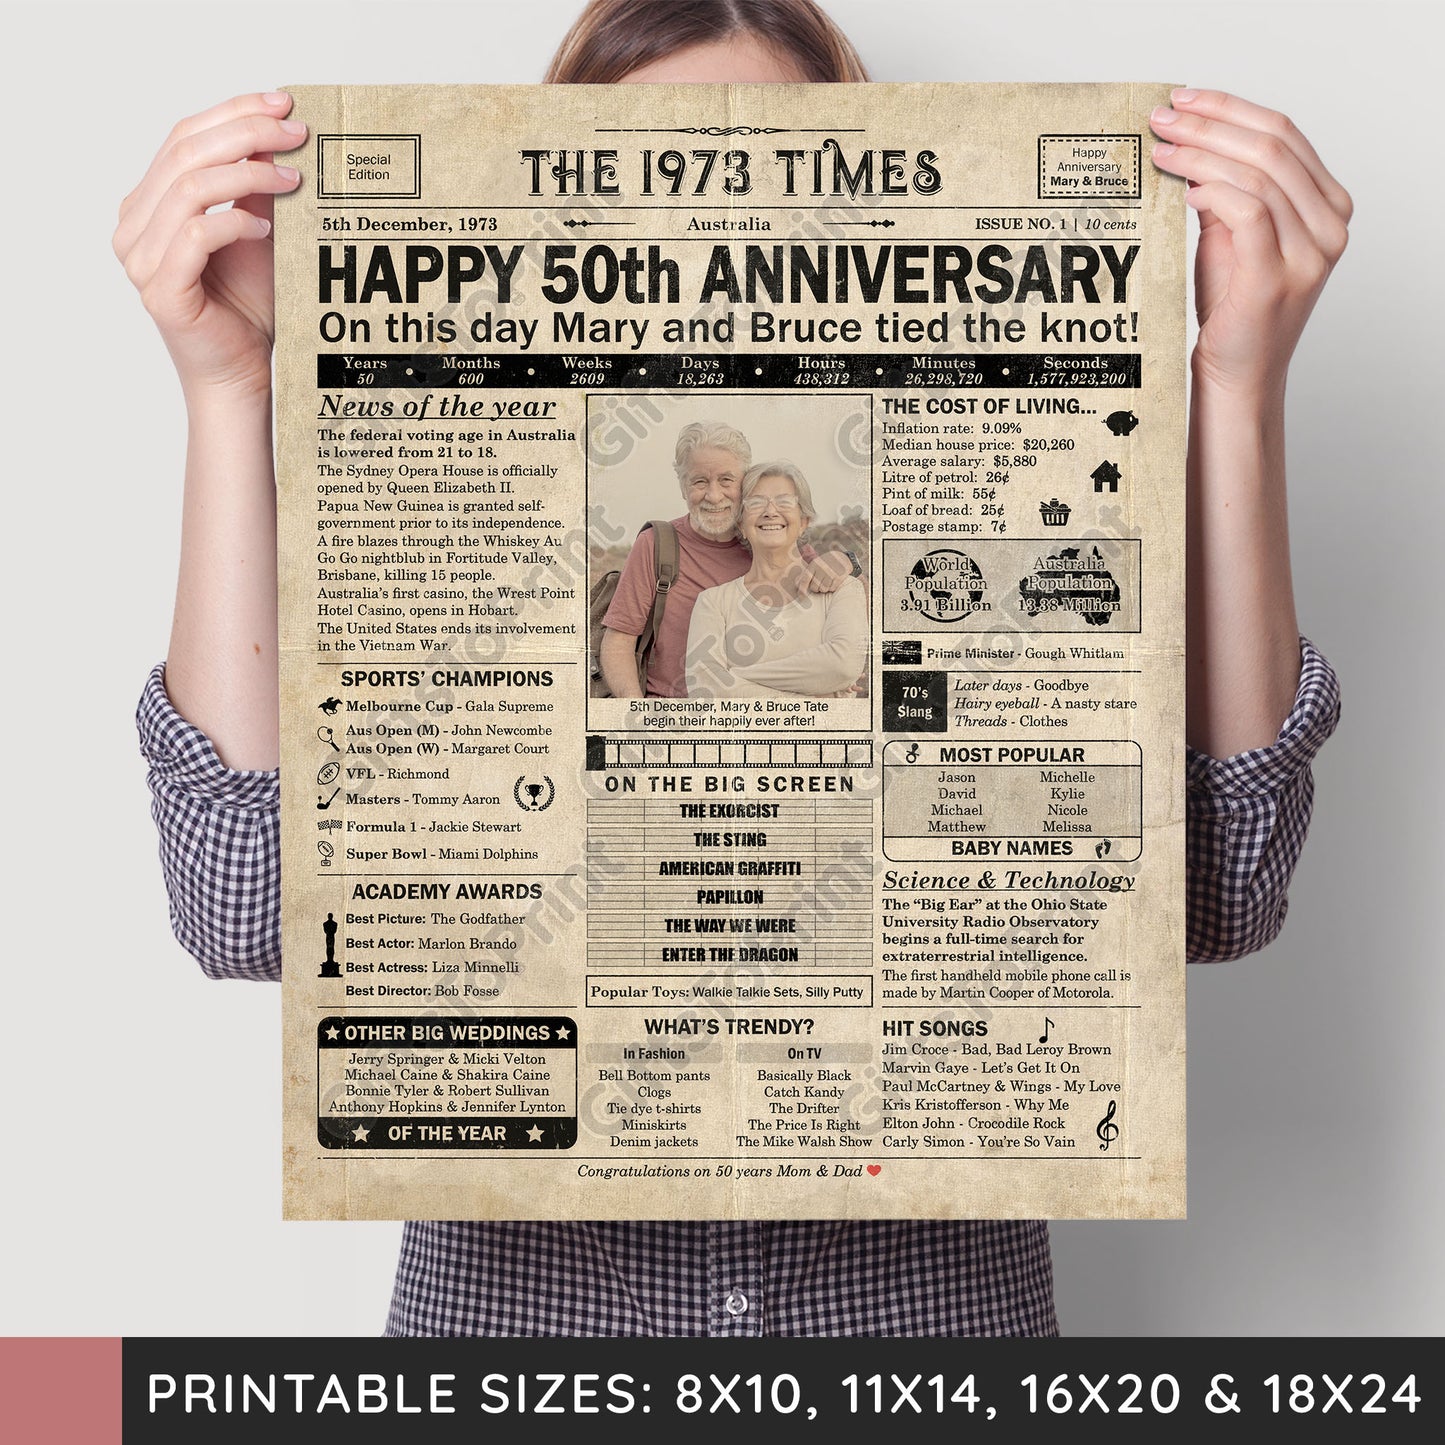 Personalised 50th Anniversary Gift: A Printable AUSTRALIAN Newspaper Poster of 1973